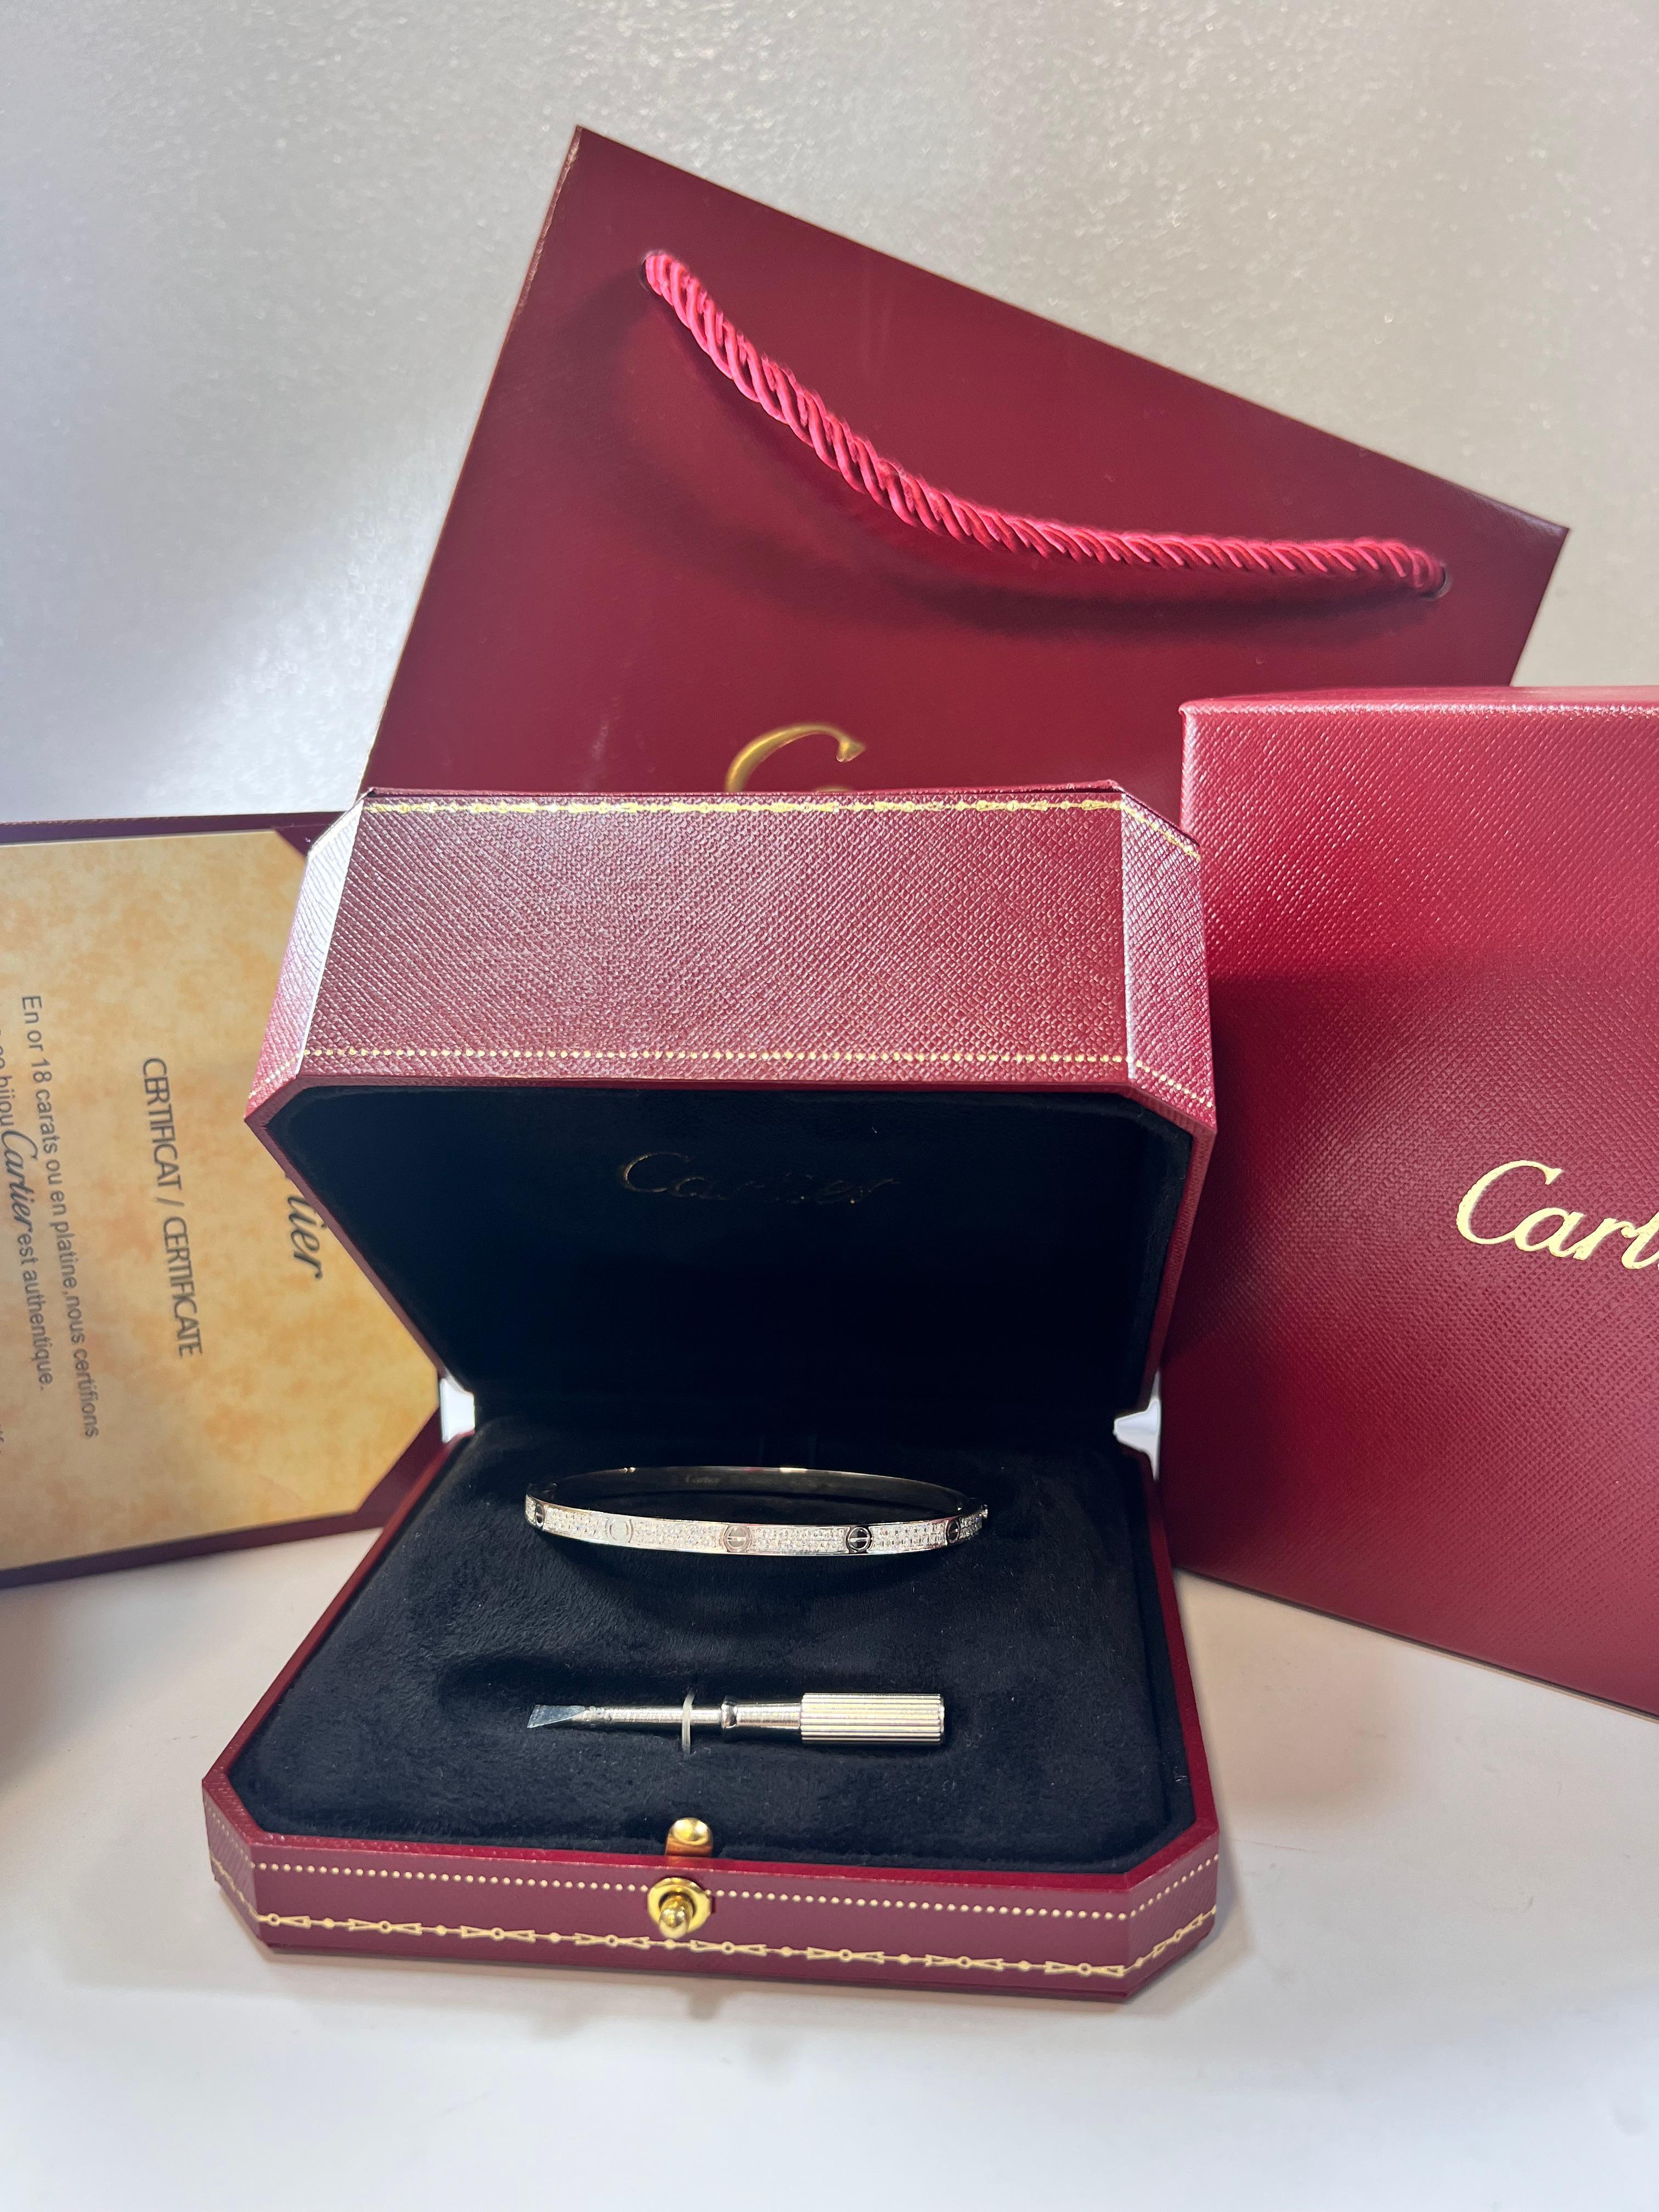 Cartier Love Bracelet Small in 18k White Gold Diamonds with box 5